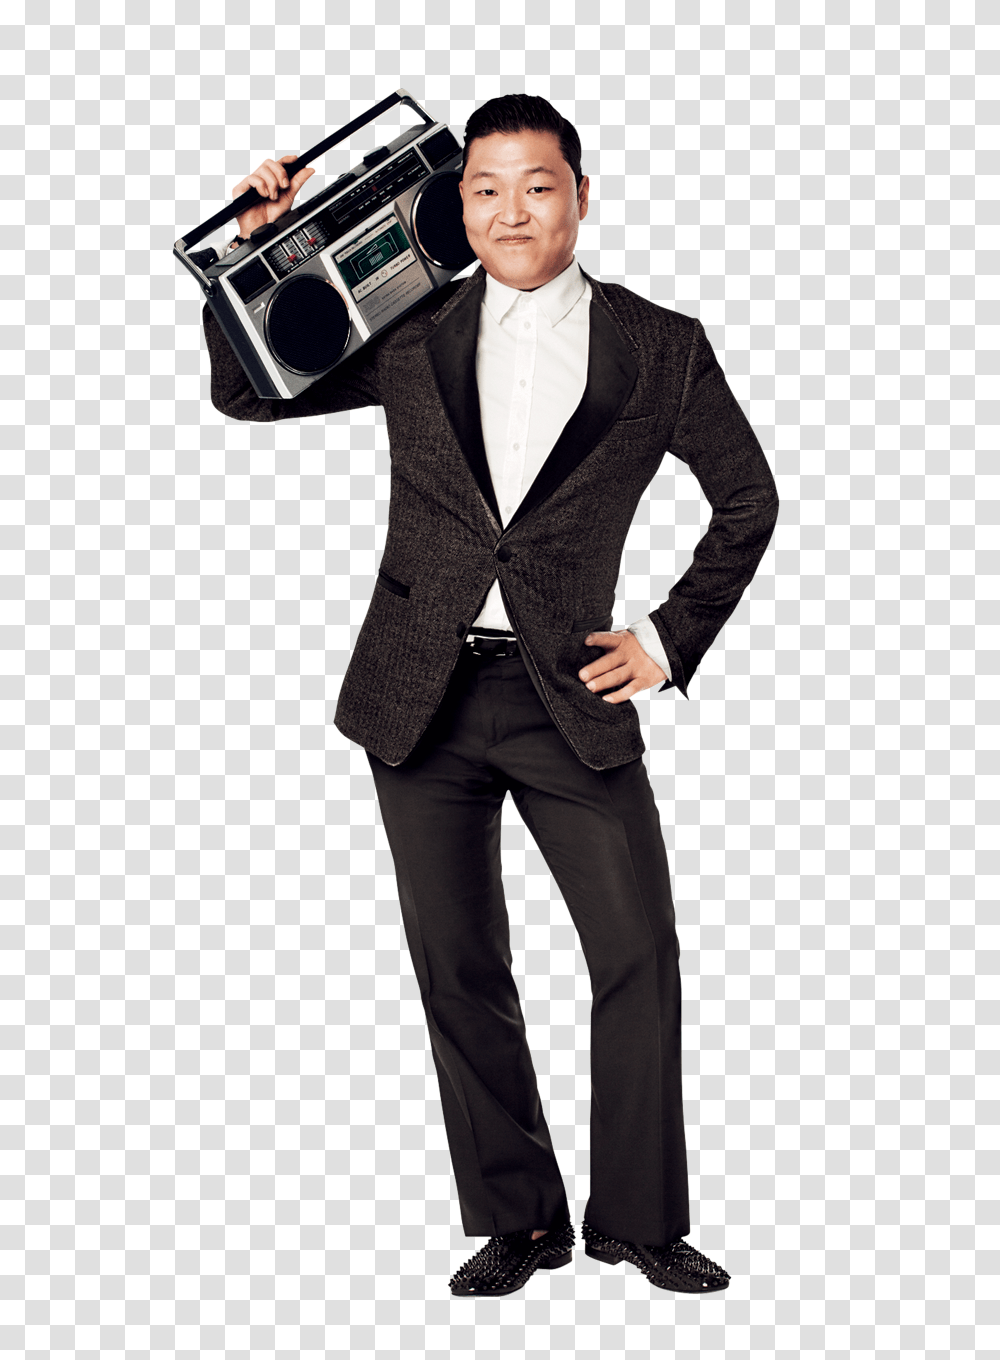 Psy On Dancing With Britney Spears And Sharing A Manager, Apparel, Suit, Overcoat Transparent Png